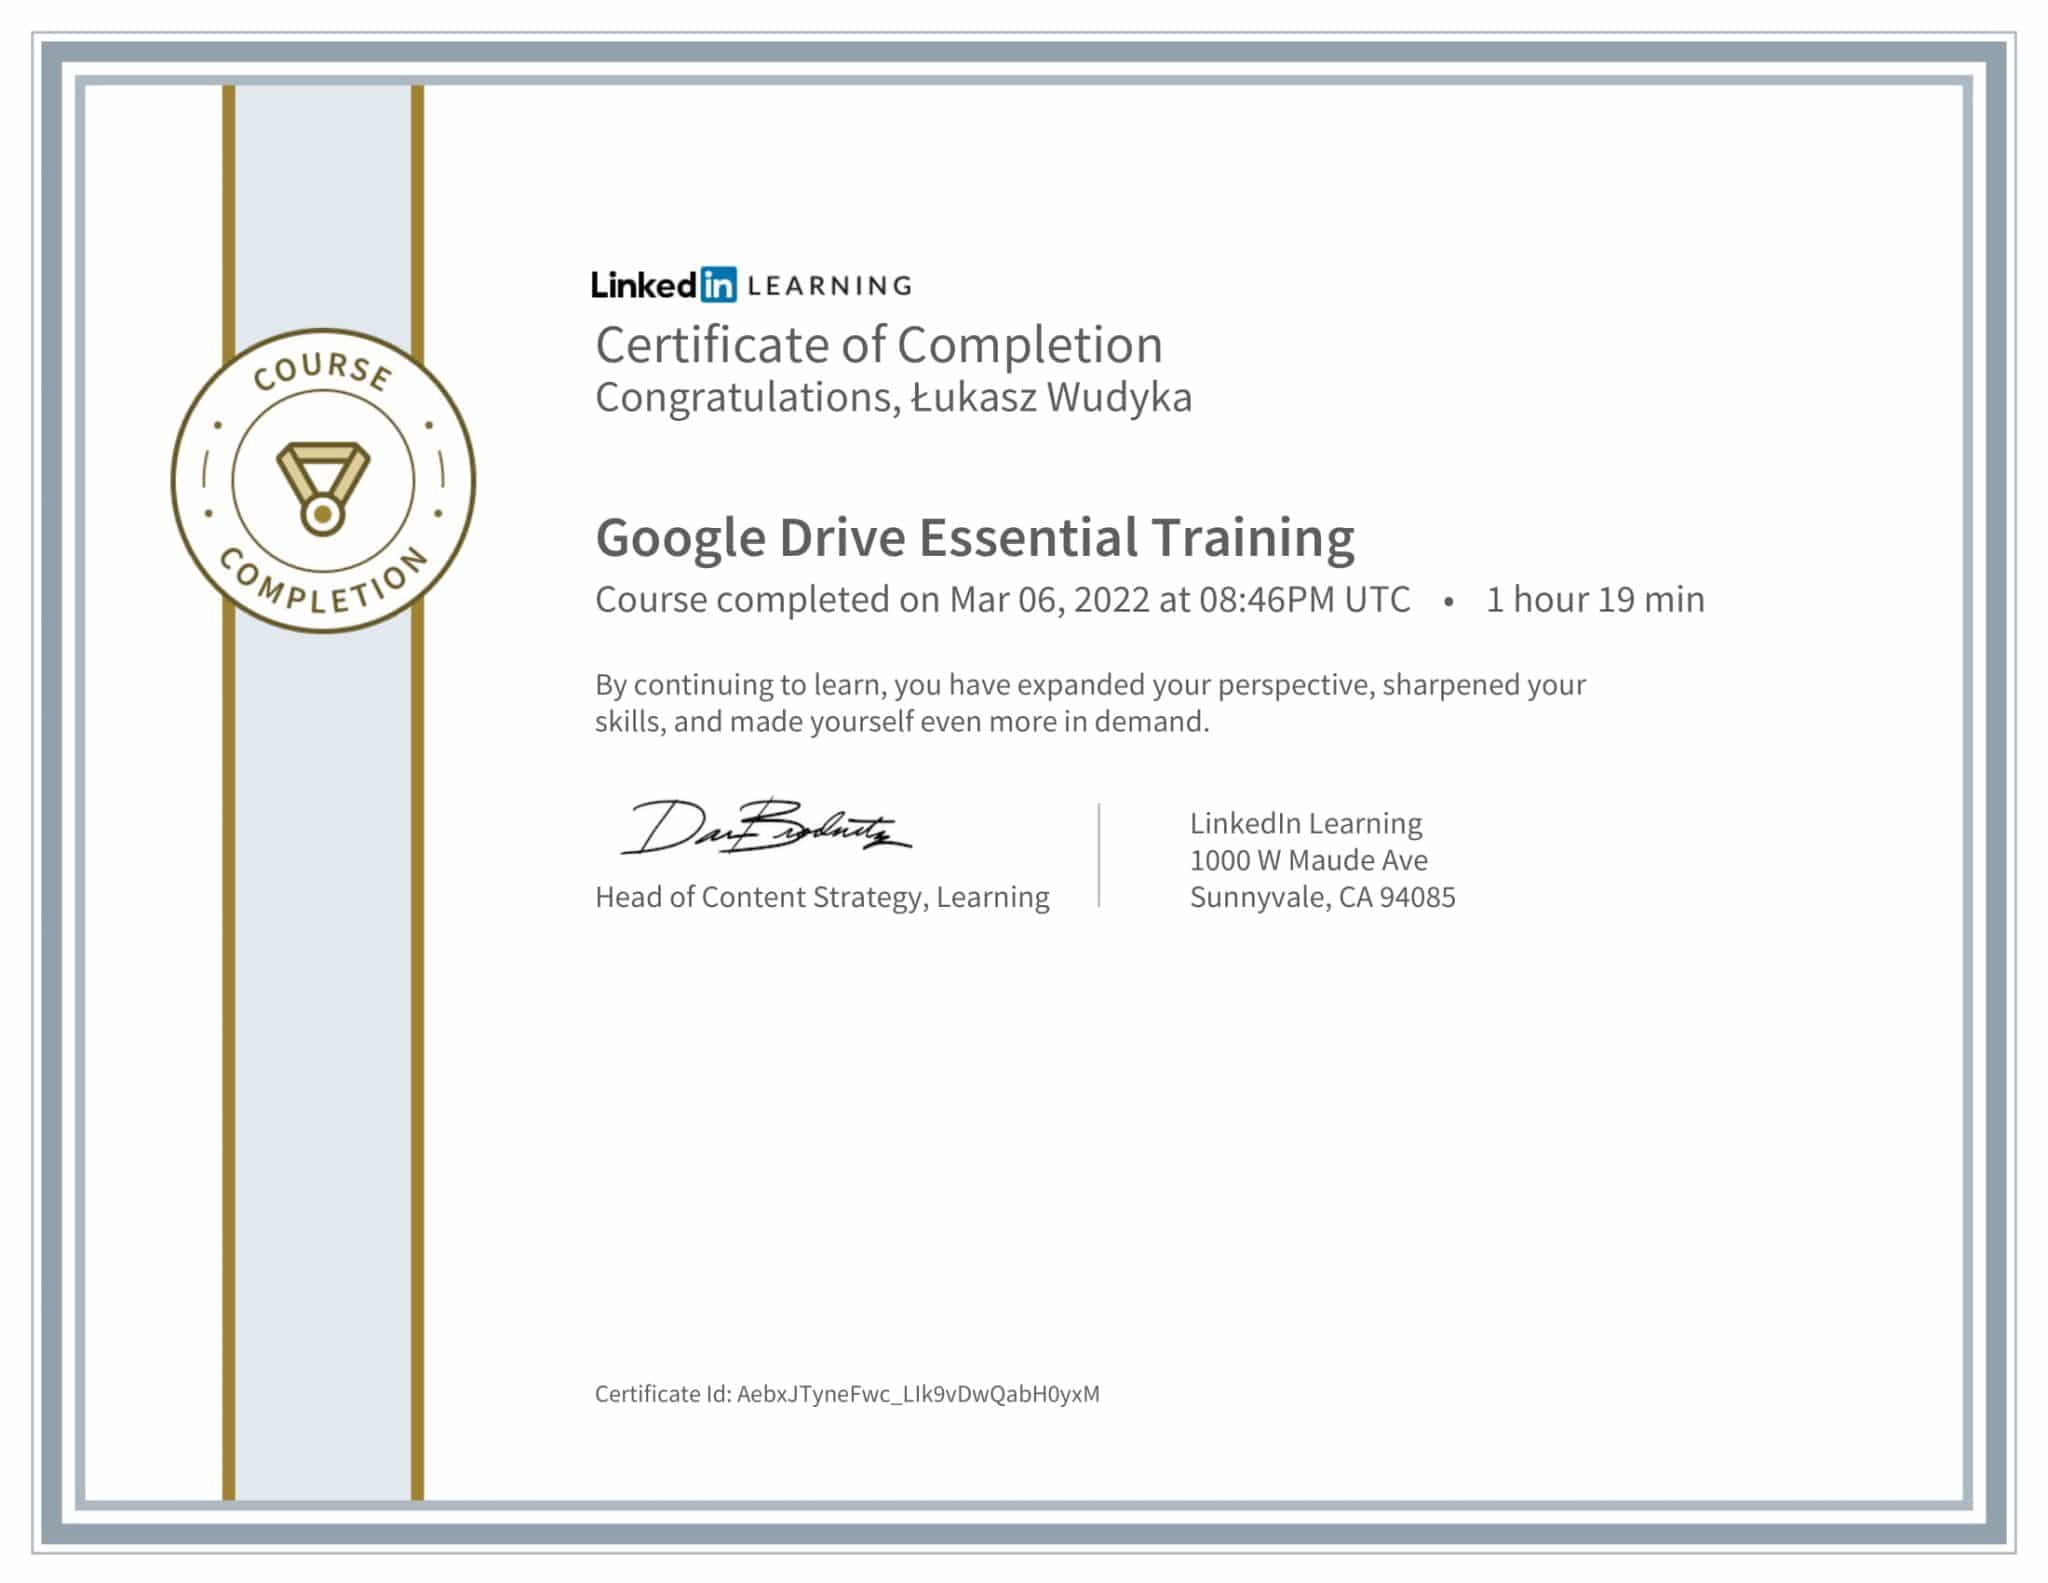 CertificateOfCompletion_Google Drive Essential Training-1